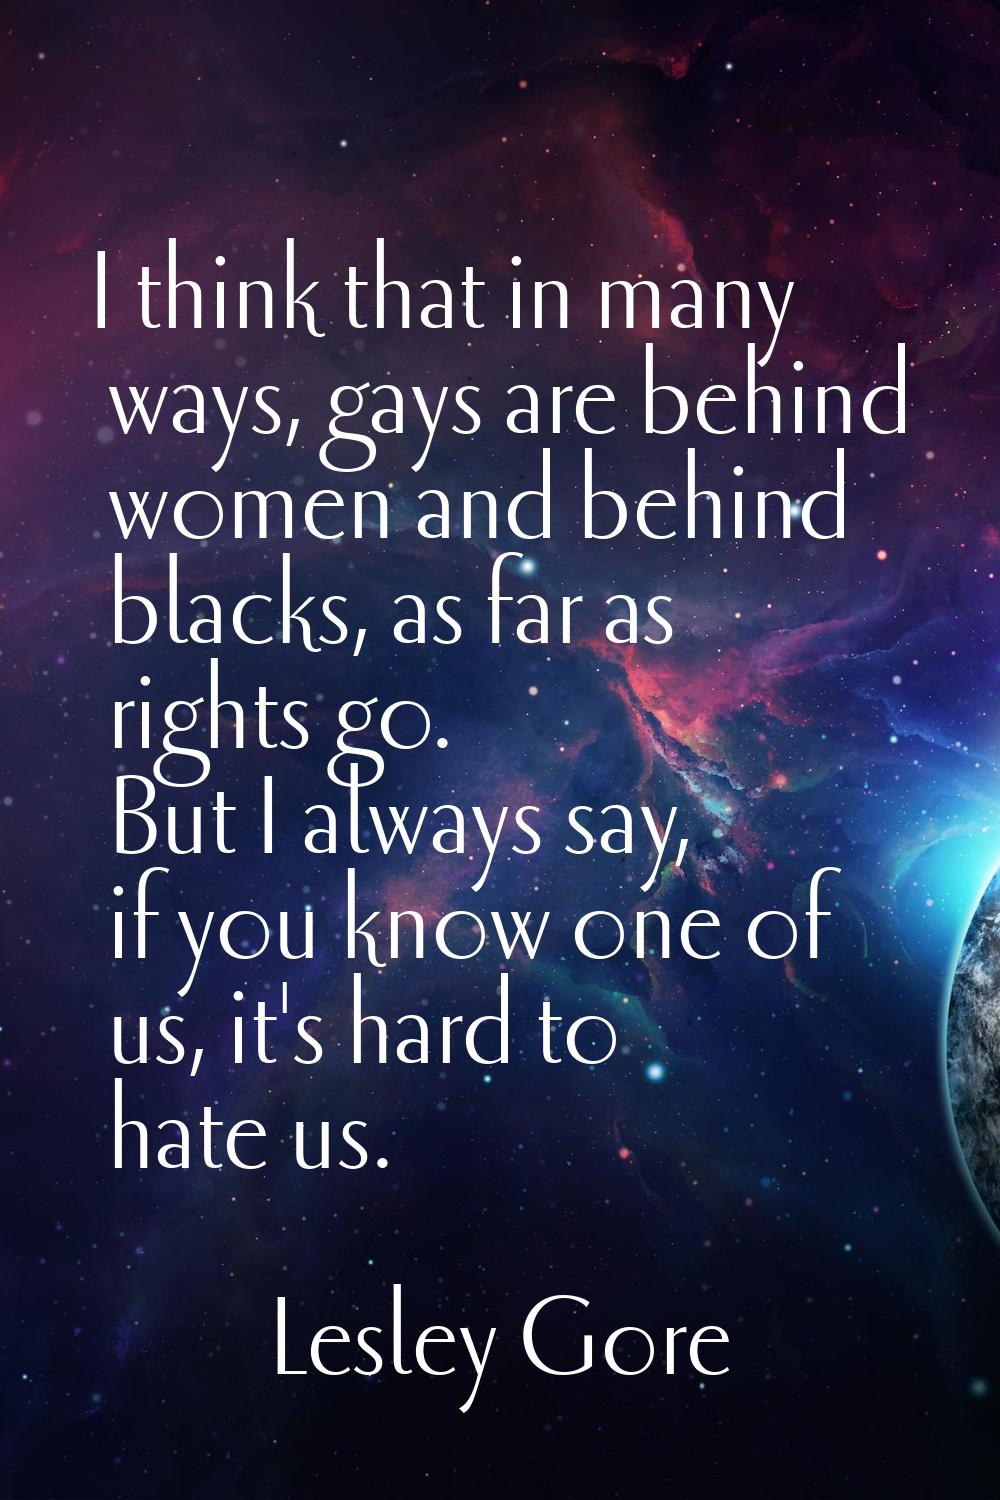 I think that in many ways, gays are behind women and behind blacks, as far as rights go. But I alwa